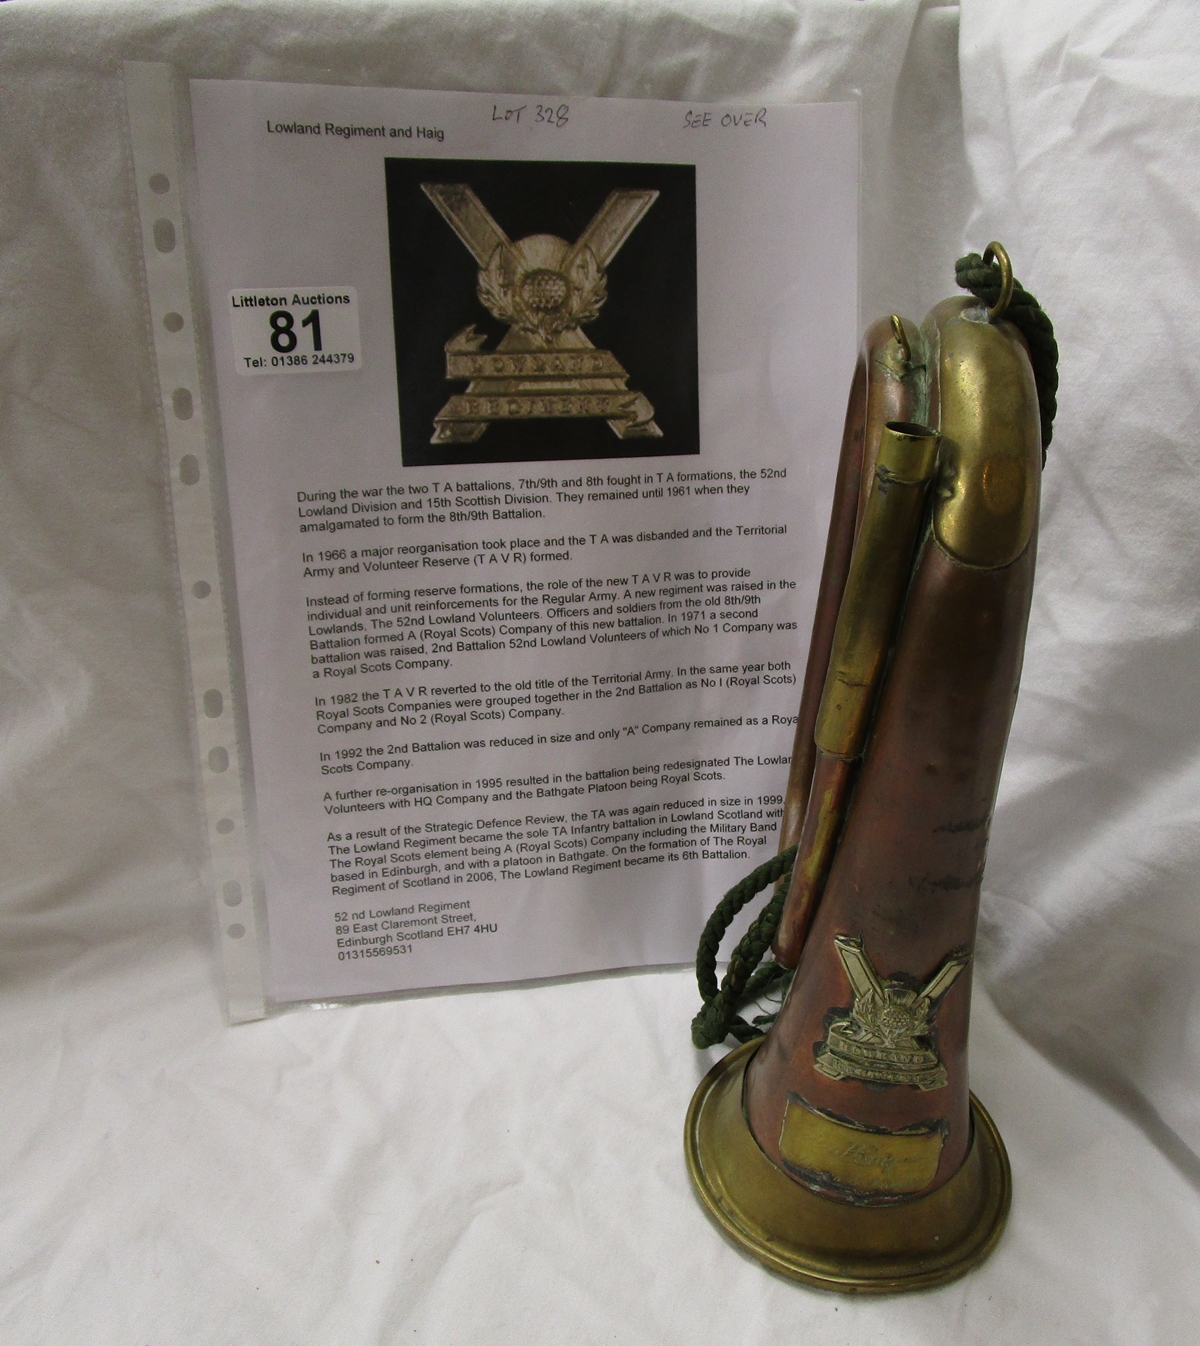 Interesting military bugle with provenance (mouth piece missing)